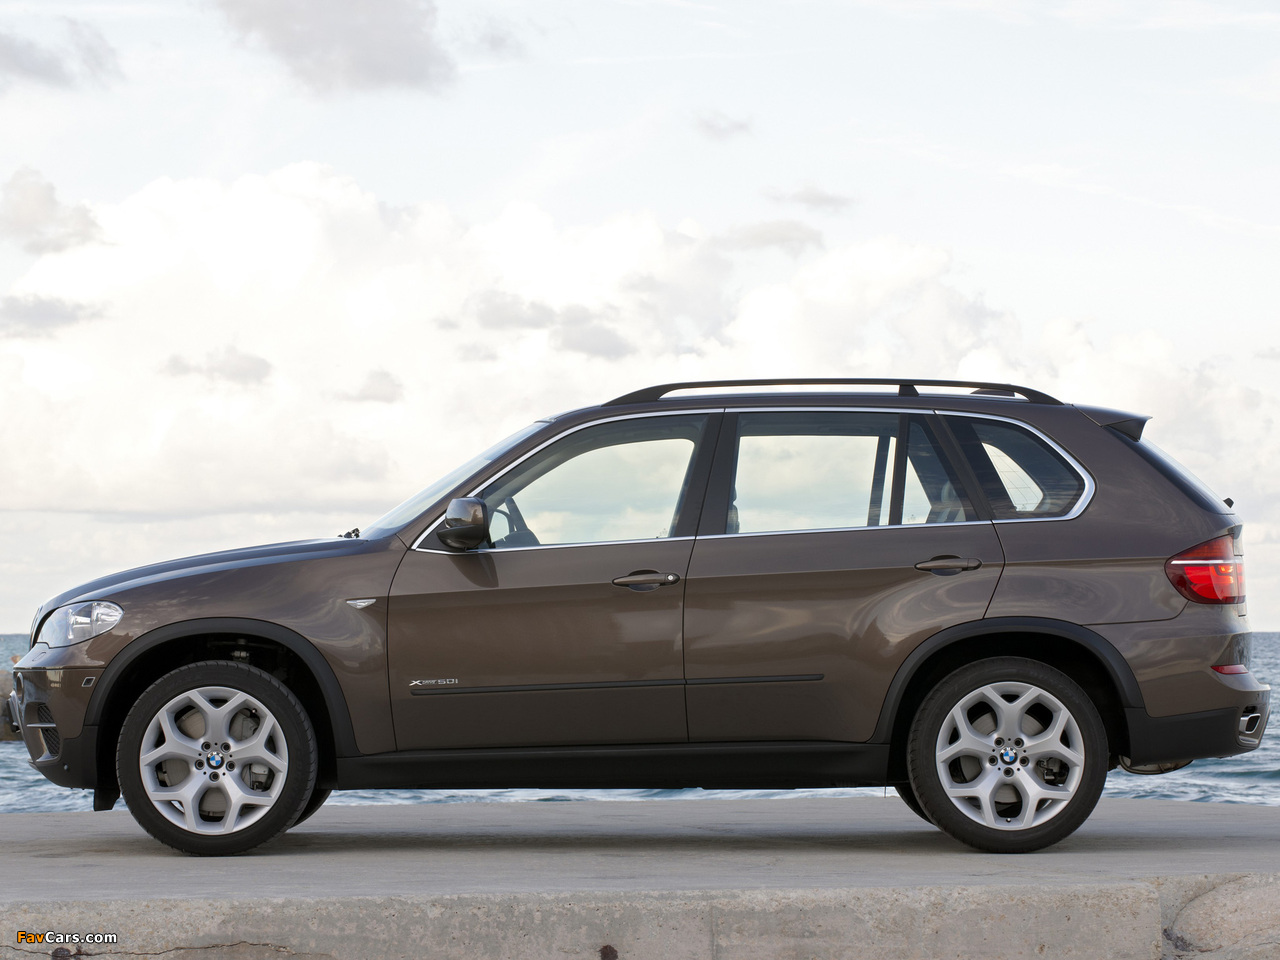 BMW X5 xDrive50i (E70) 2010 pictures (1280 x 960)